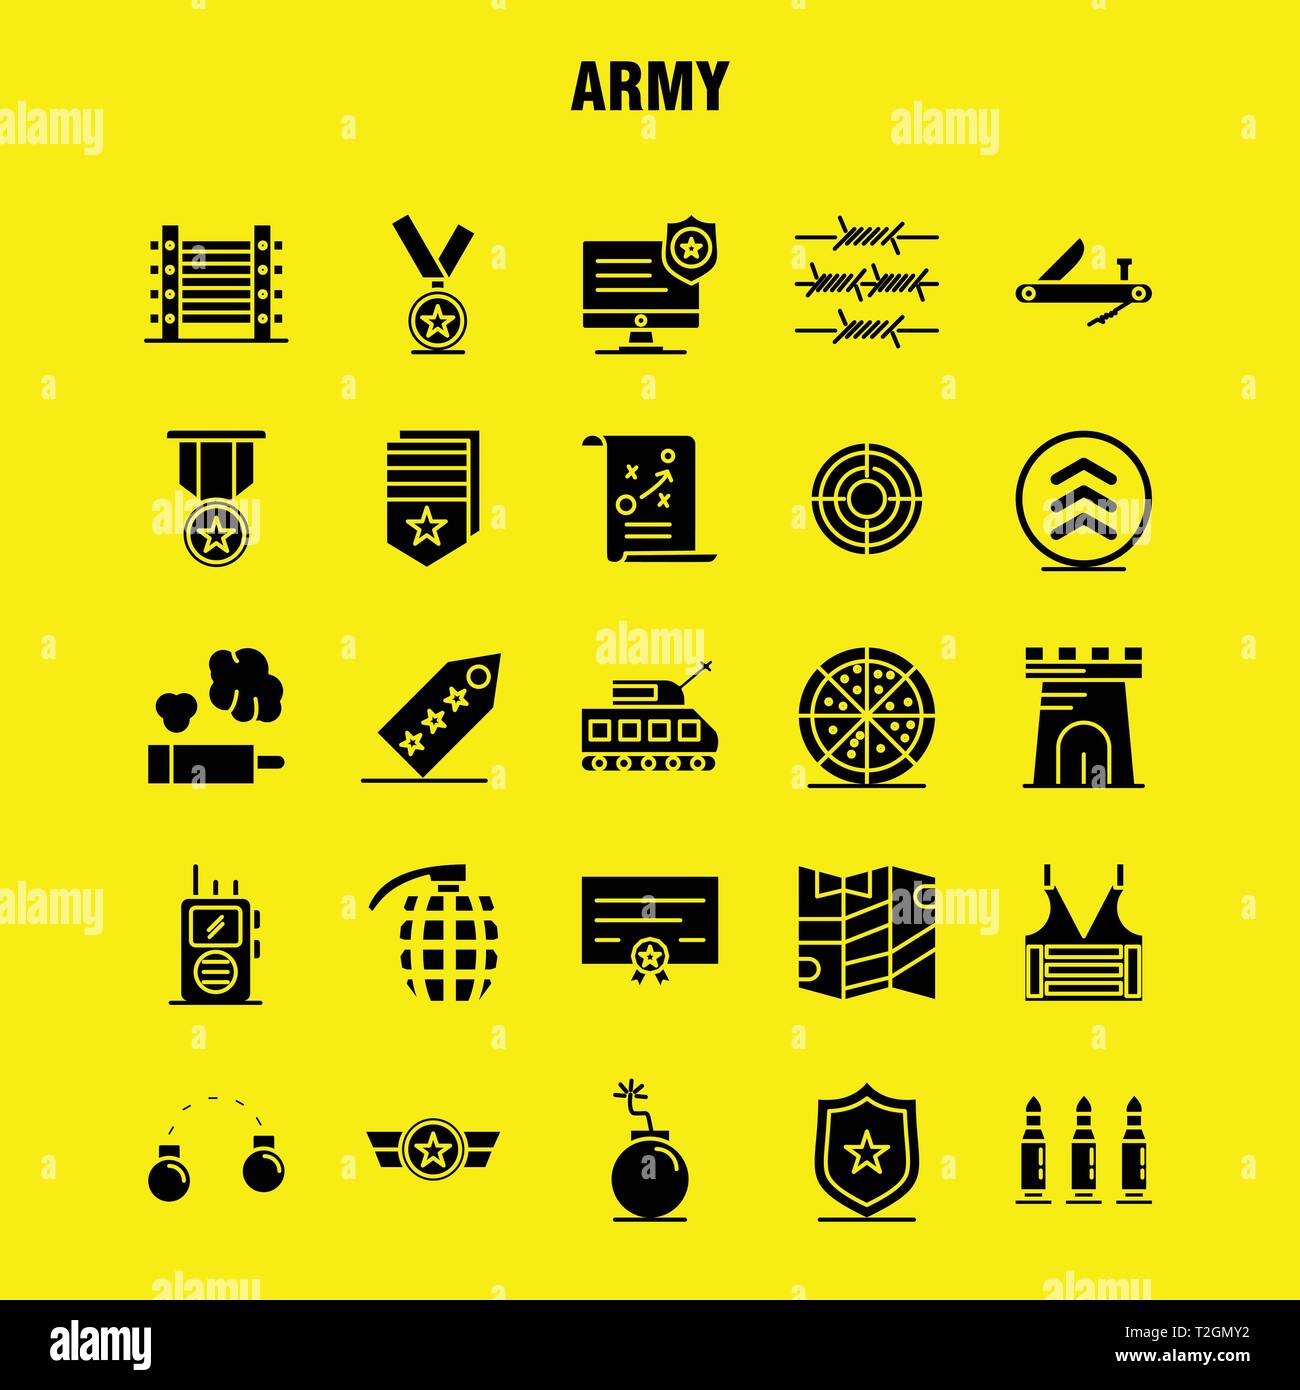 Army Solid Glyph Icons Set For Infographics, Mobile UX/UI Kit And Print Design. Include: Monitor, Badge, Enforcement, Law, Army, Barbed Wire, French,  Stock Vector